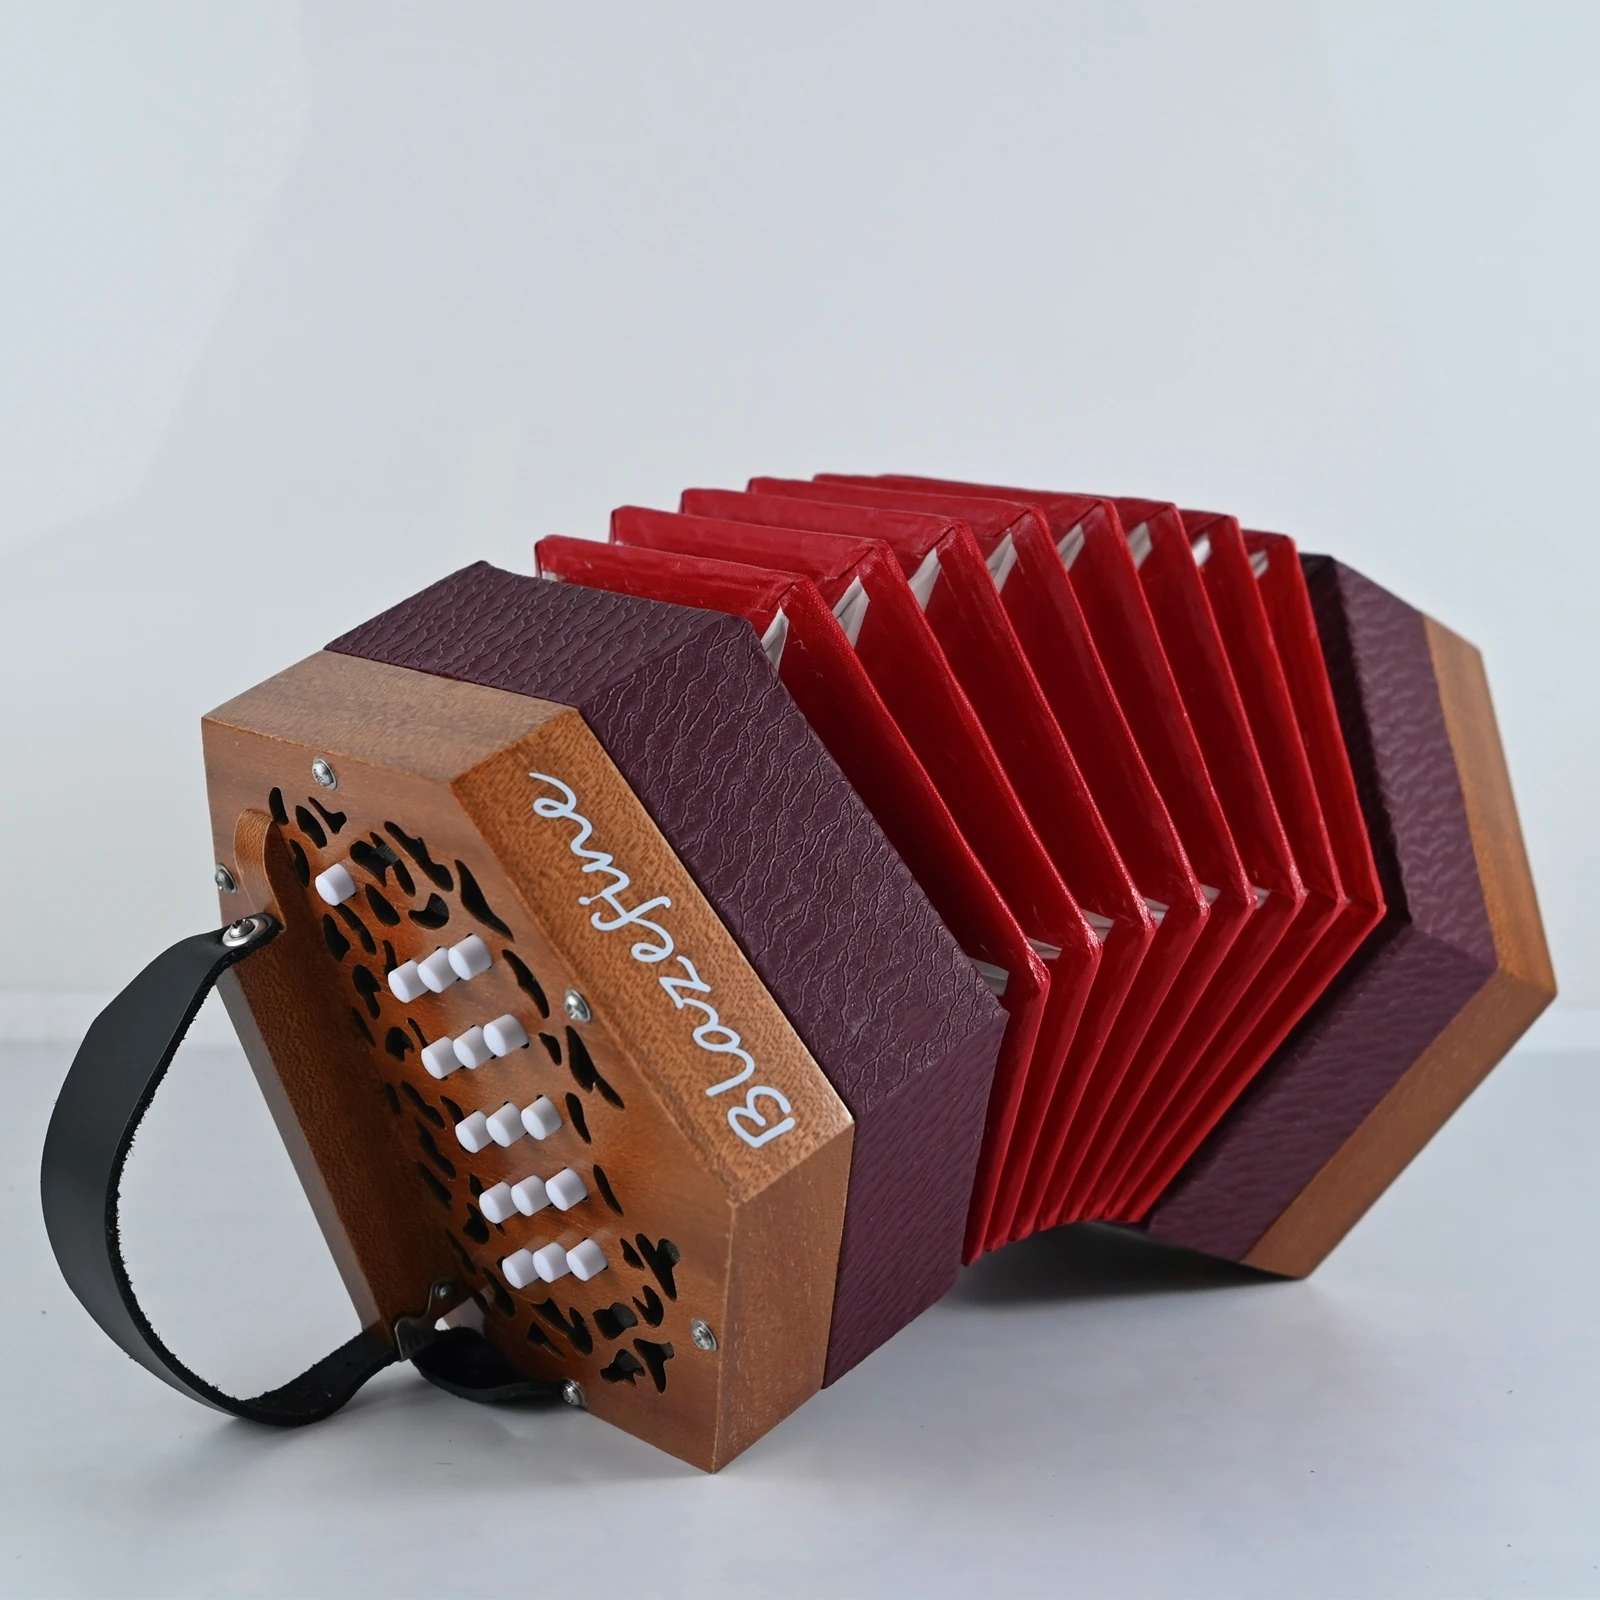 Blazefine Anglo Concertina ,Different Note On Pull And Push,Adult Primary Professional Playing Hexagon Accordion